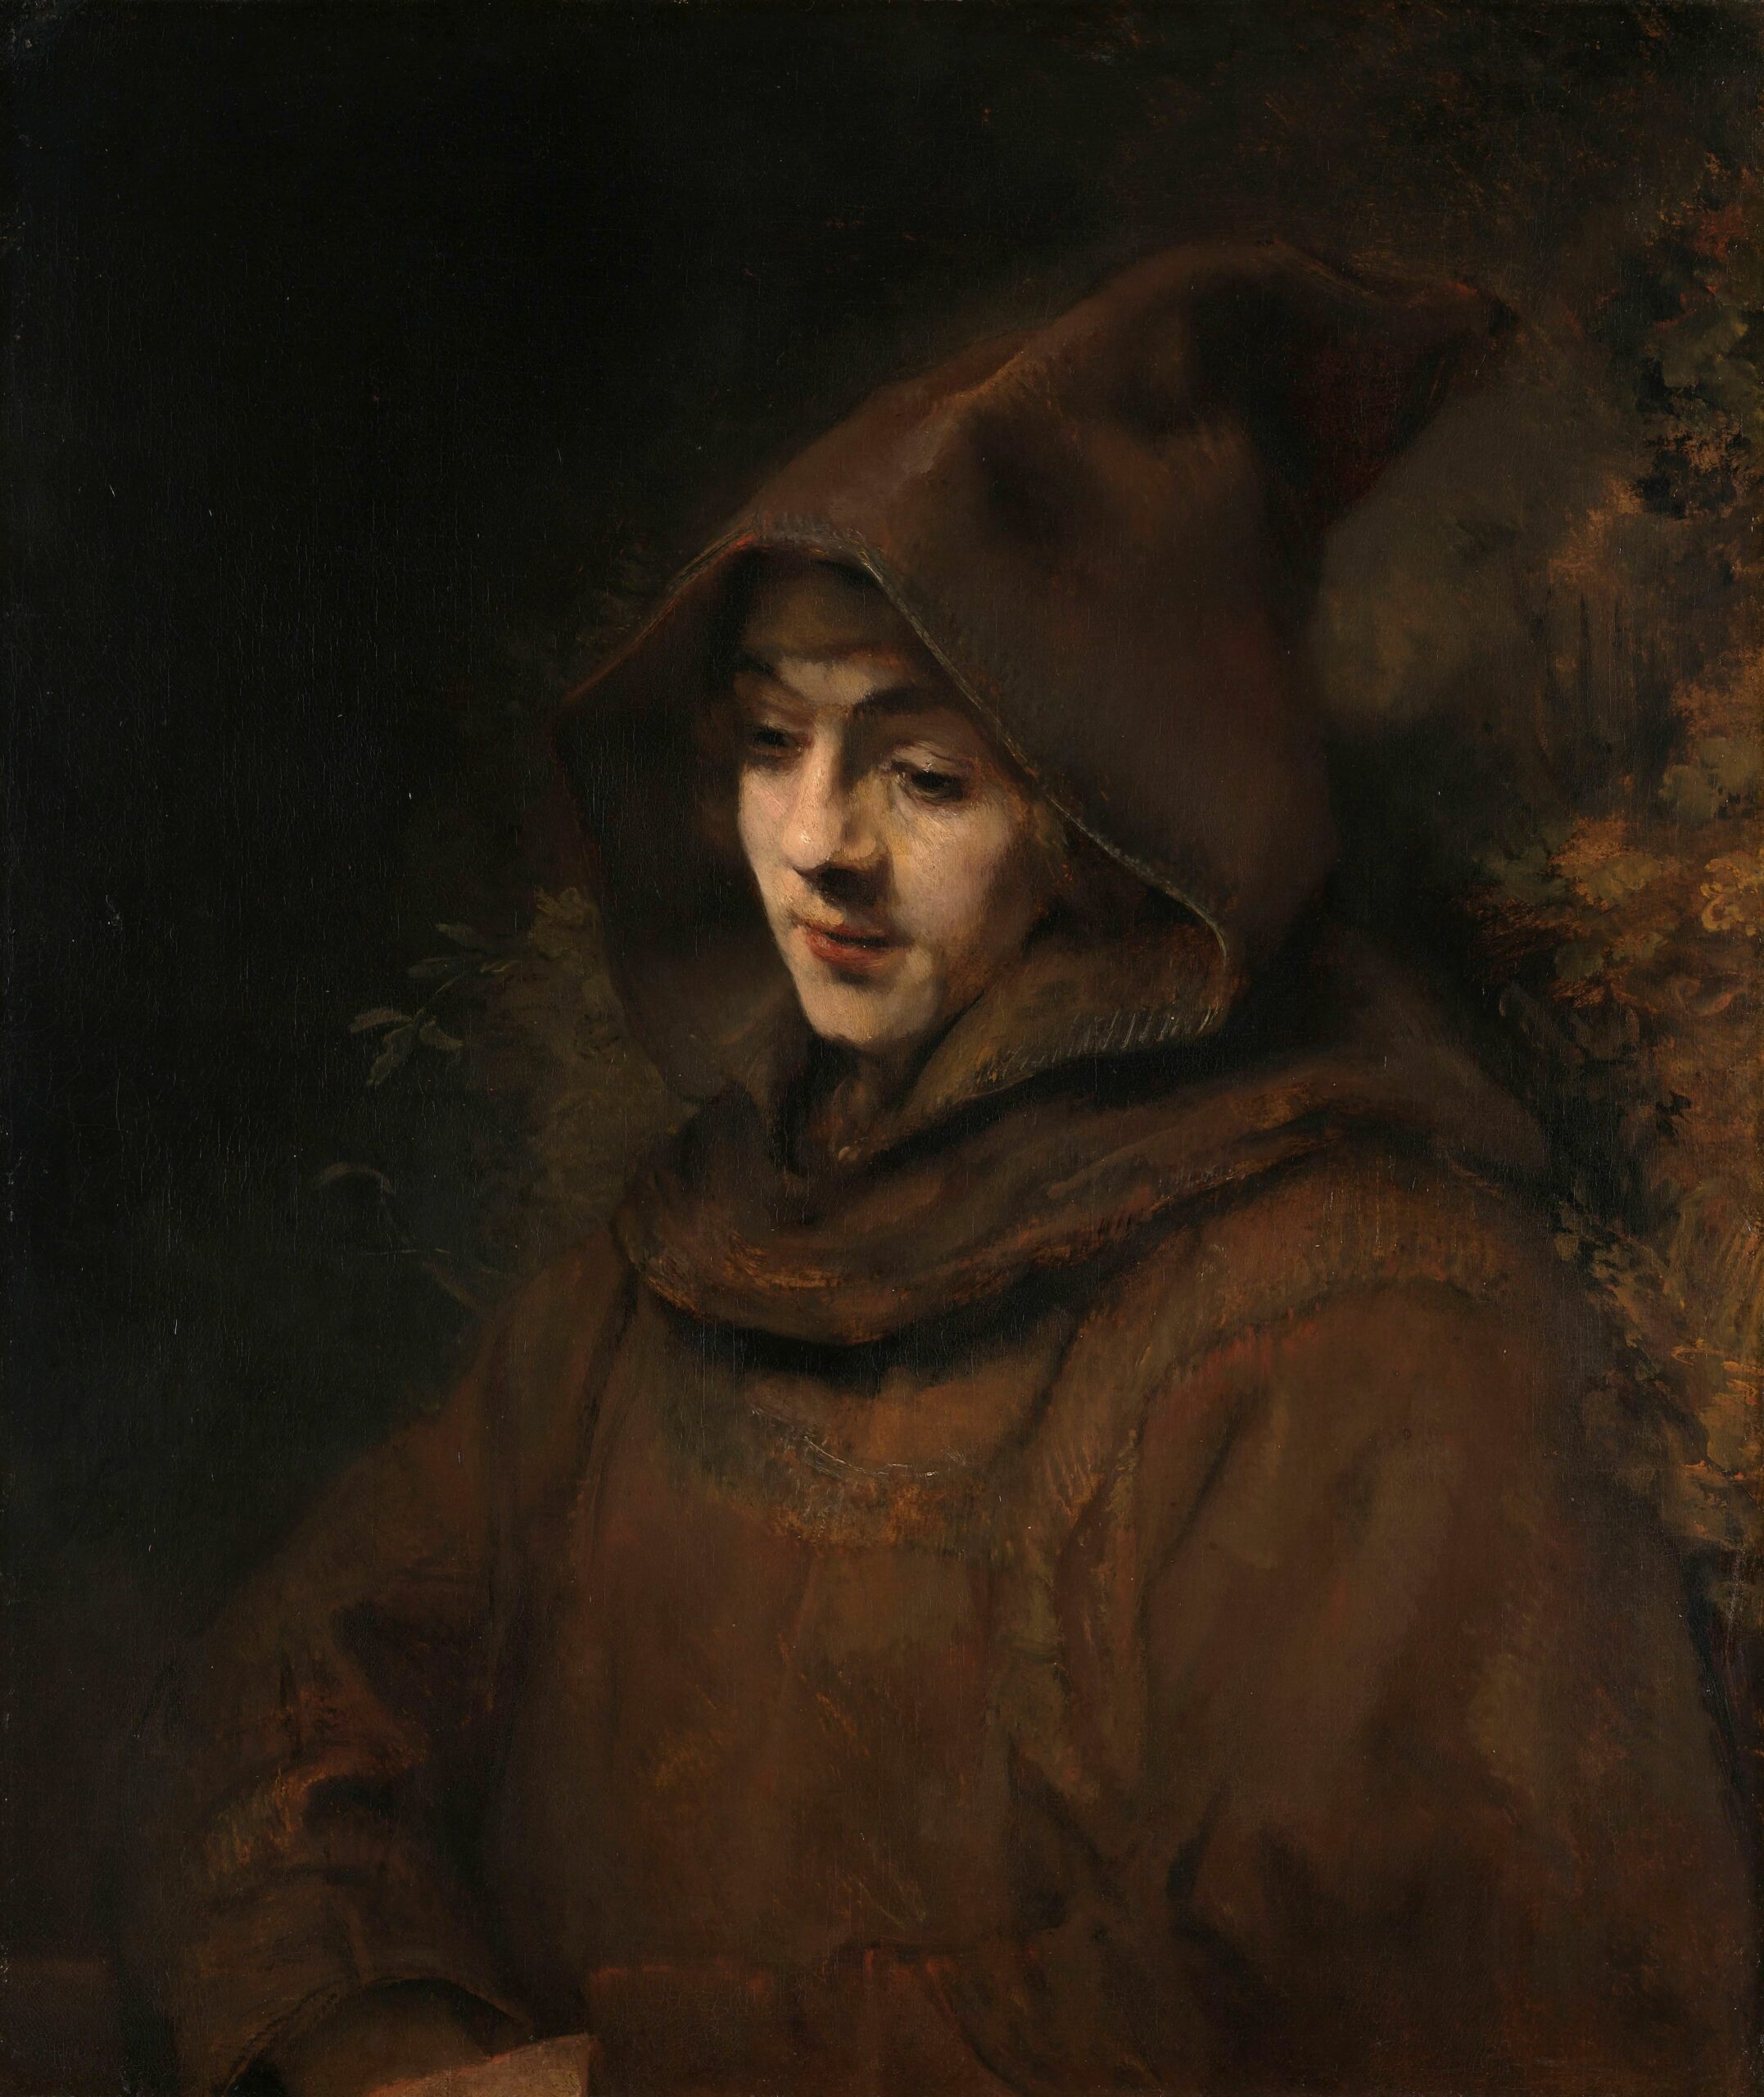 The Rijksmuseum in Amsterdam Has Digitized 709,000 Works of Art, Including Famous Works by Rembrandt and Vermeer